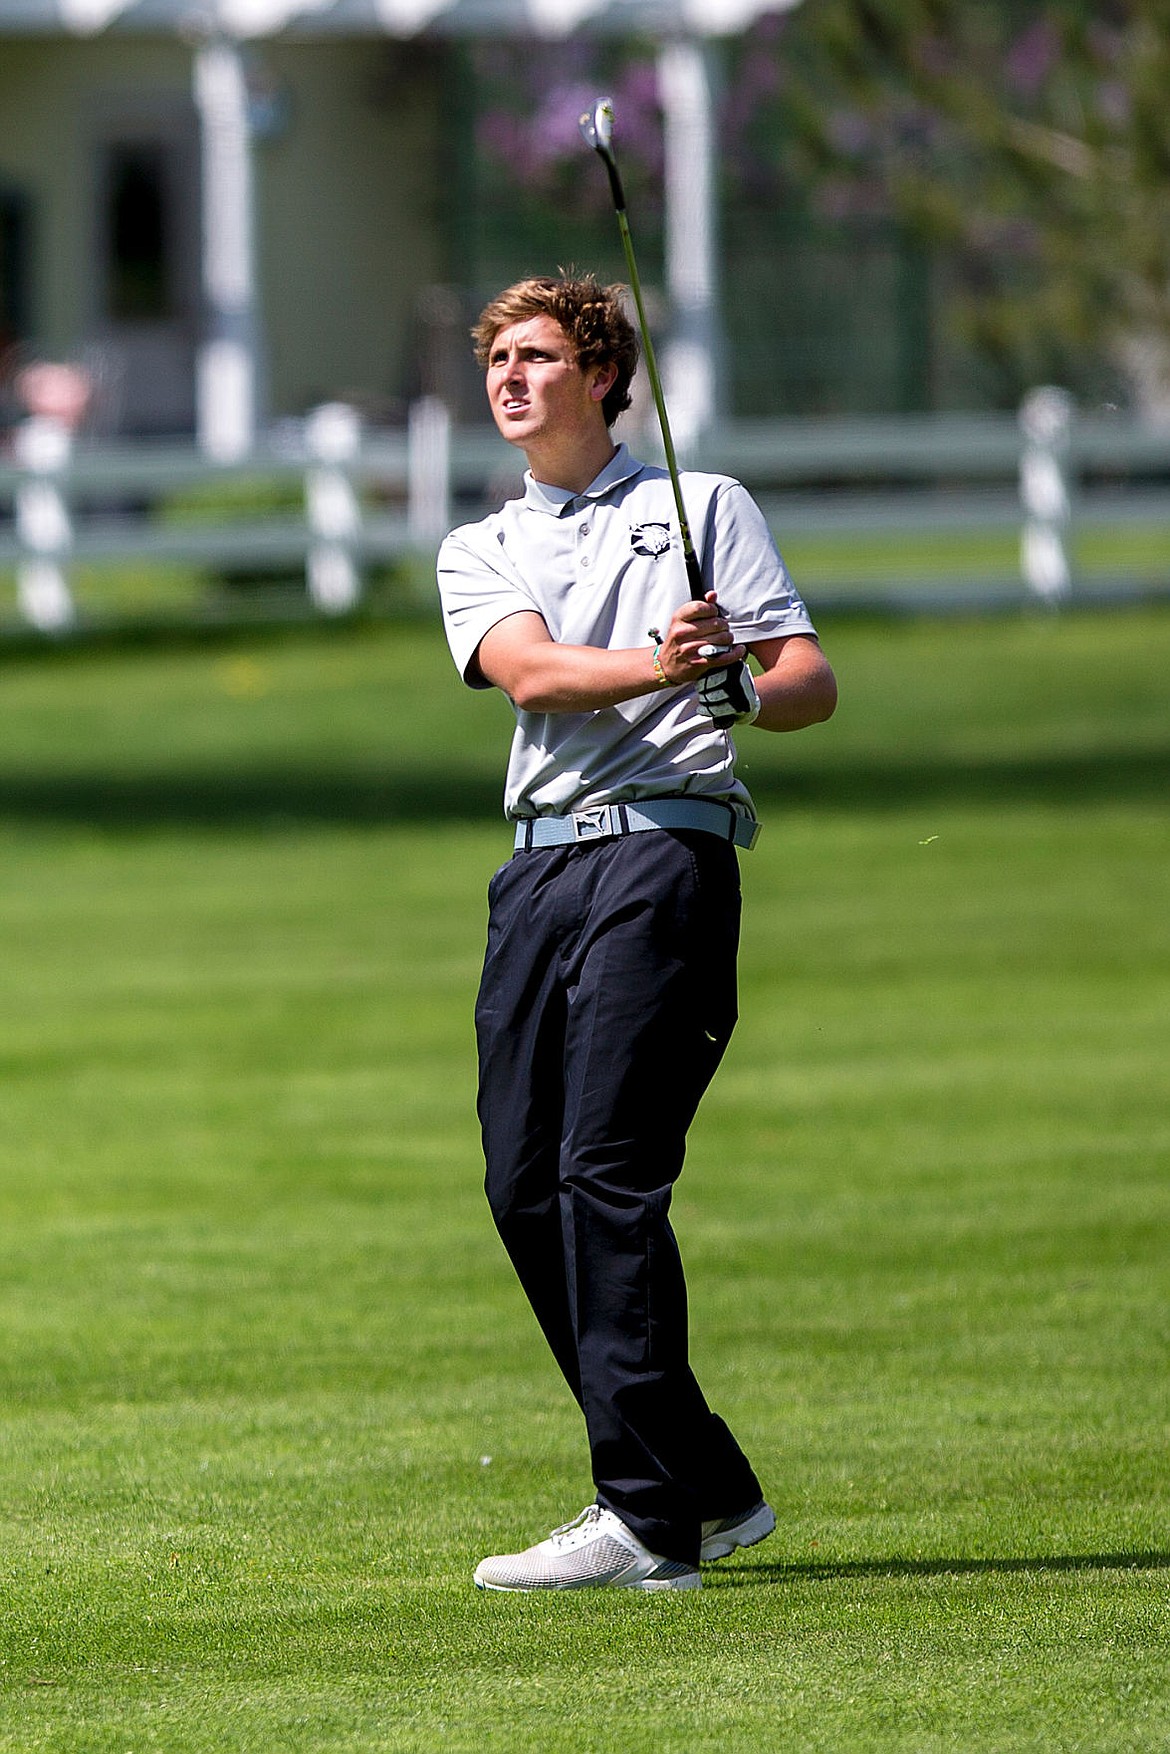 &lt;p&gt;Alex Callahan on Coeur d'Alene watches his approach shot on Monday at the Kraus Invitational at Avondale Golf Club.&lt;/p&gt;